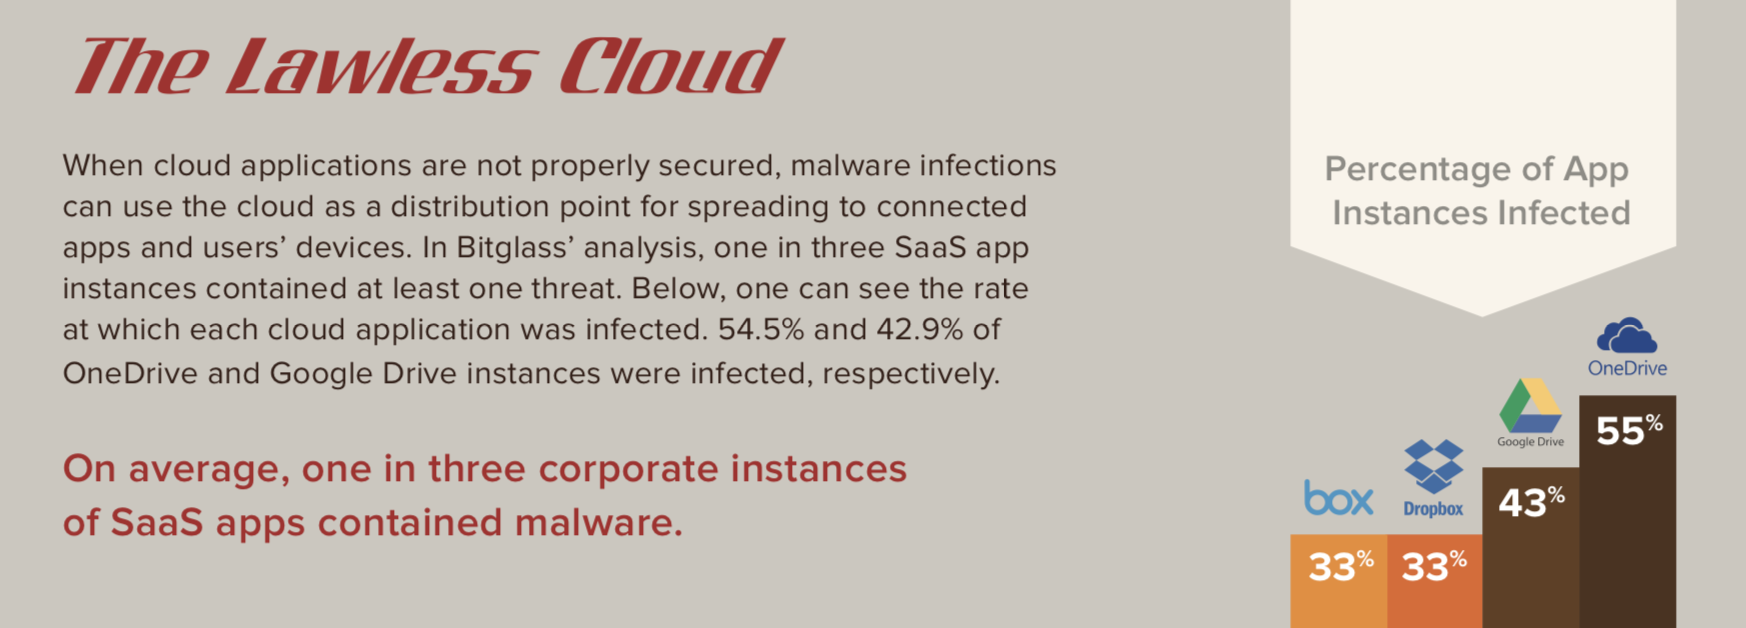 SaaS apps contained malware